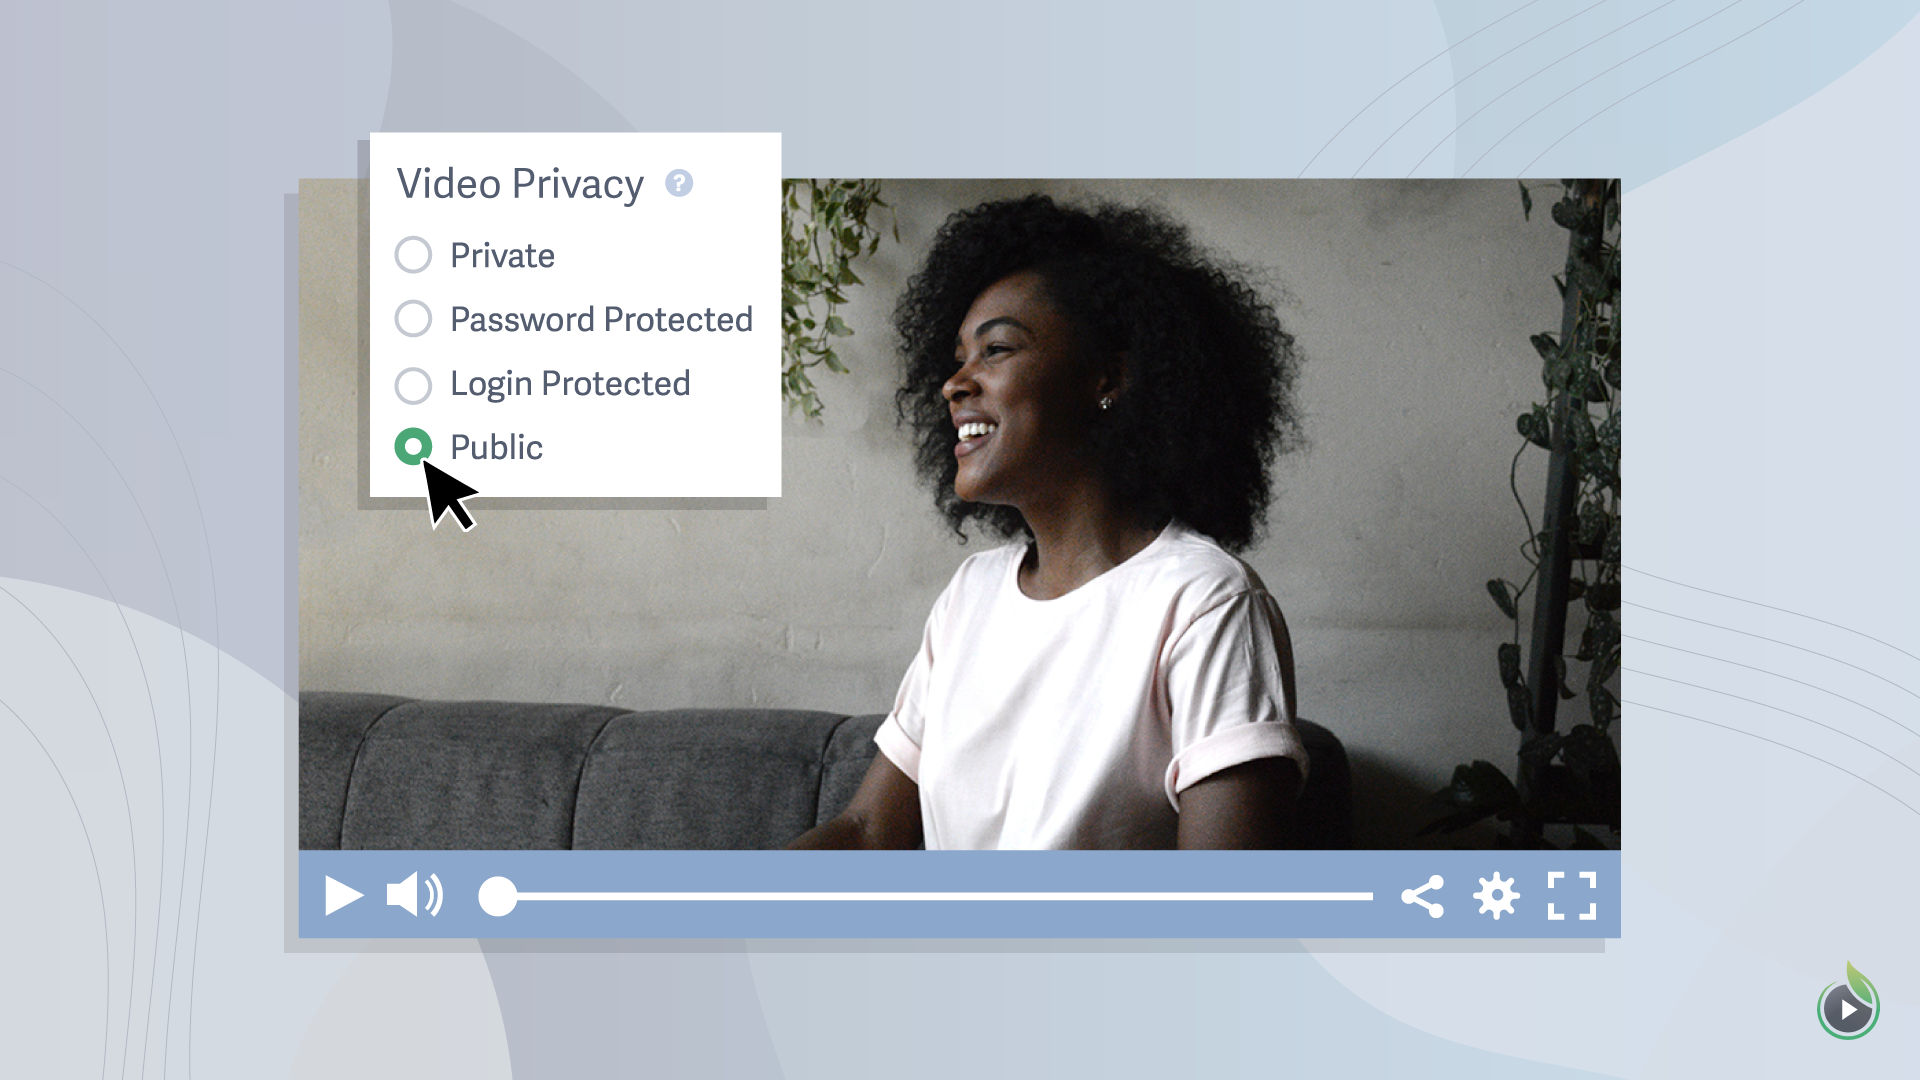 Protect your videos and define your audience through enterprise privacy options. For advanced control, you can even implement single sign-on, restrict the networks that can load your videos, and limit video playback to specific geographic areas.